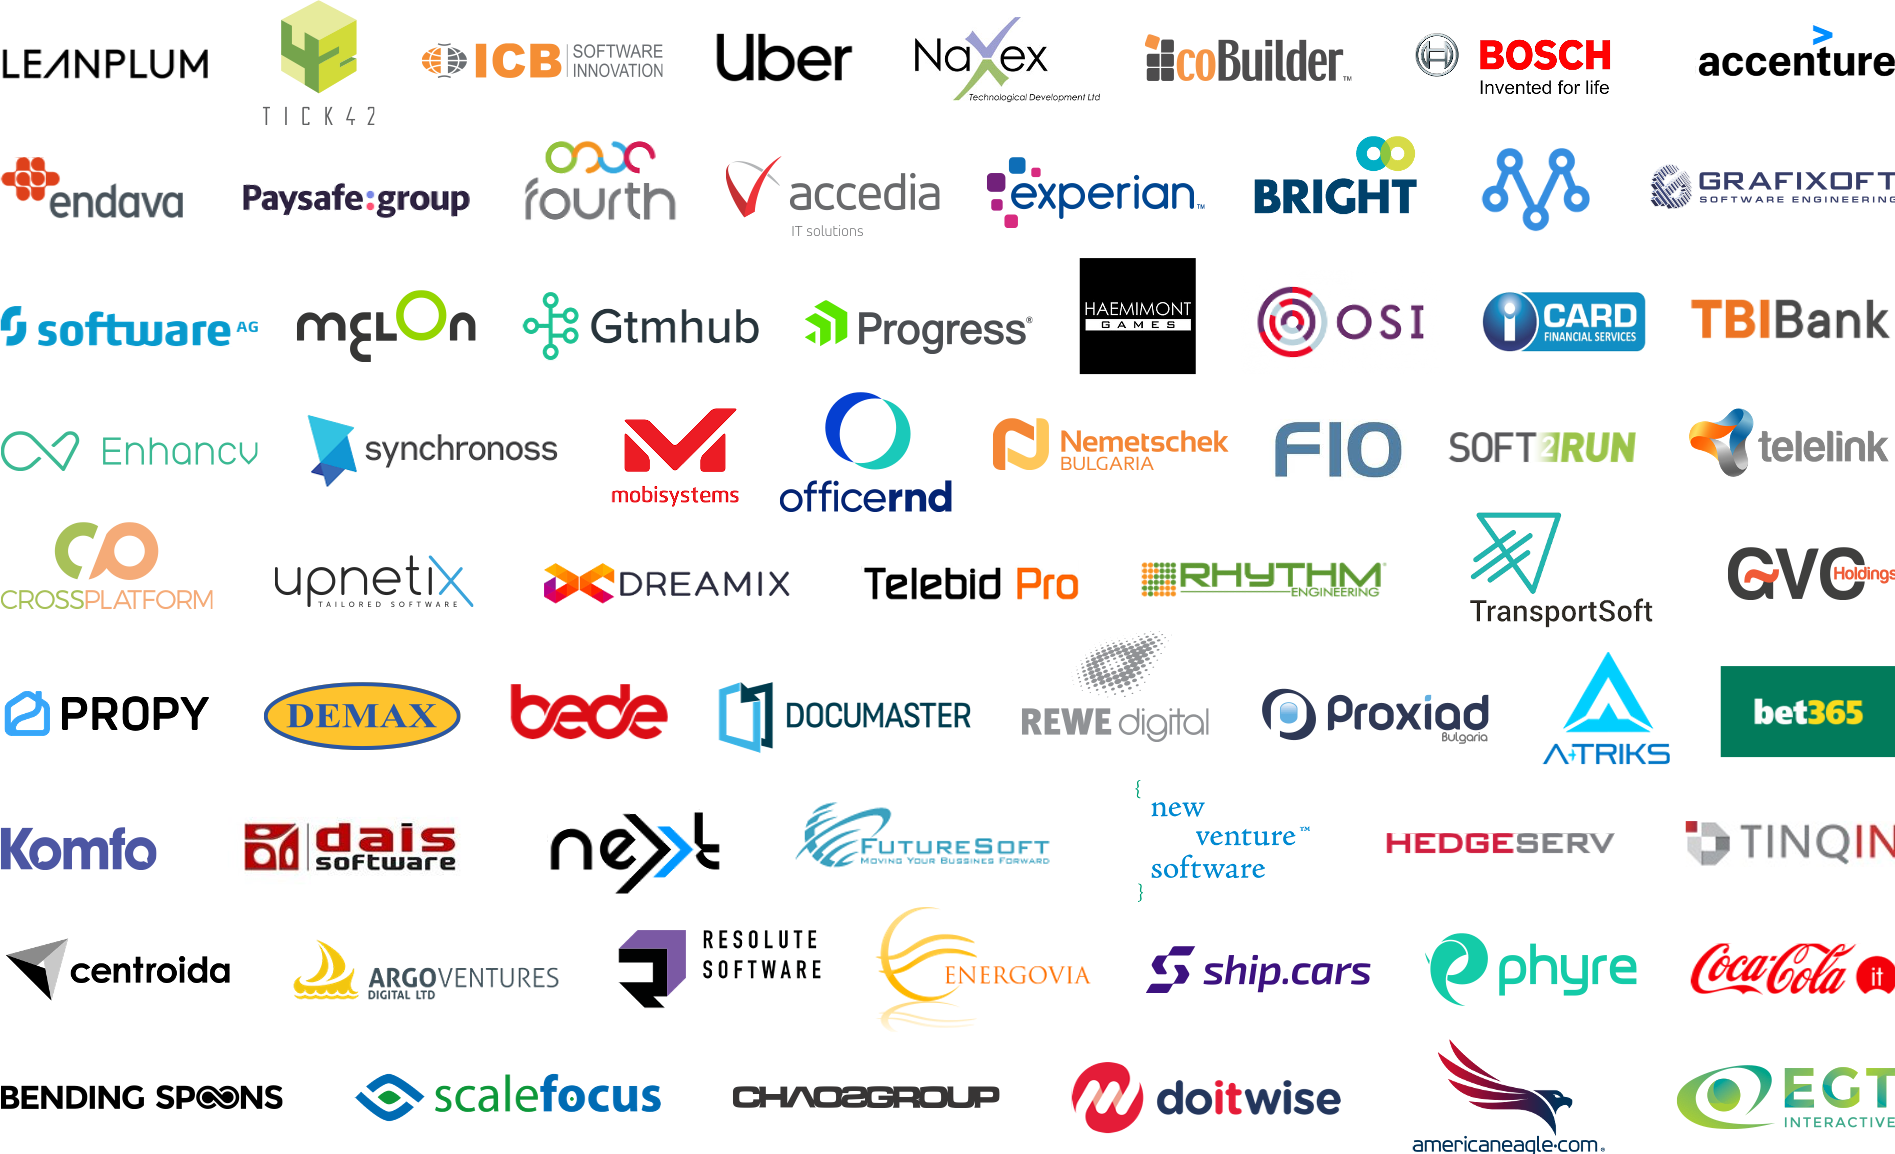 Image with logos of the partners of Telerik Academy